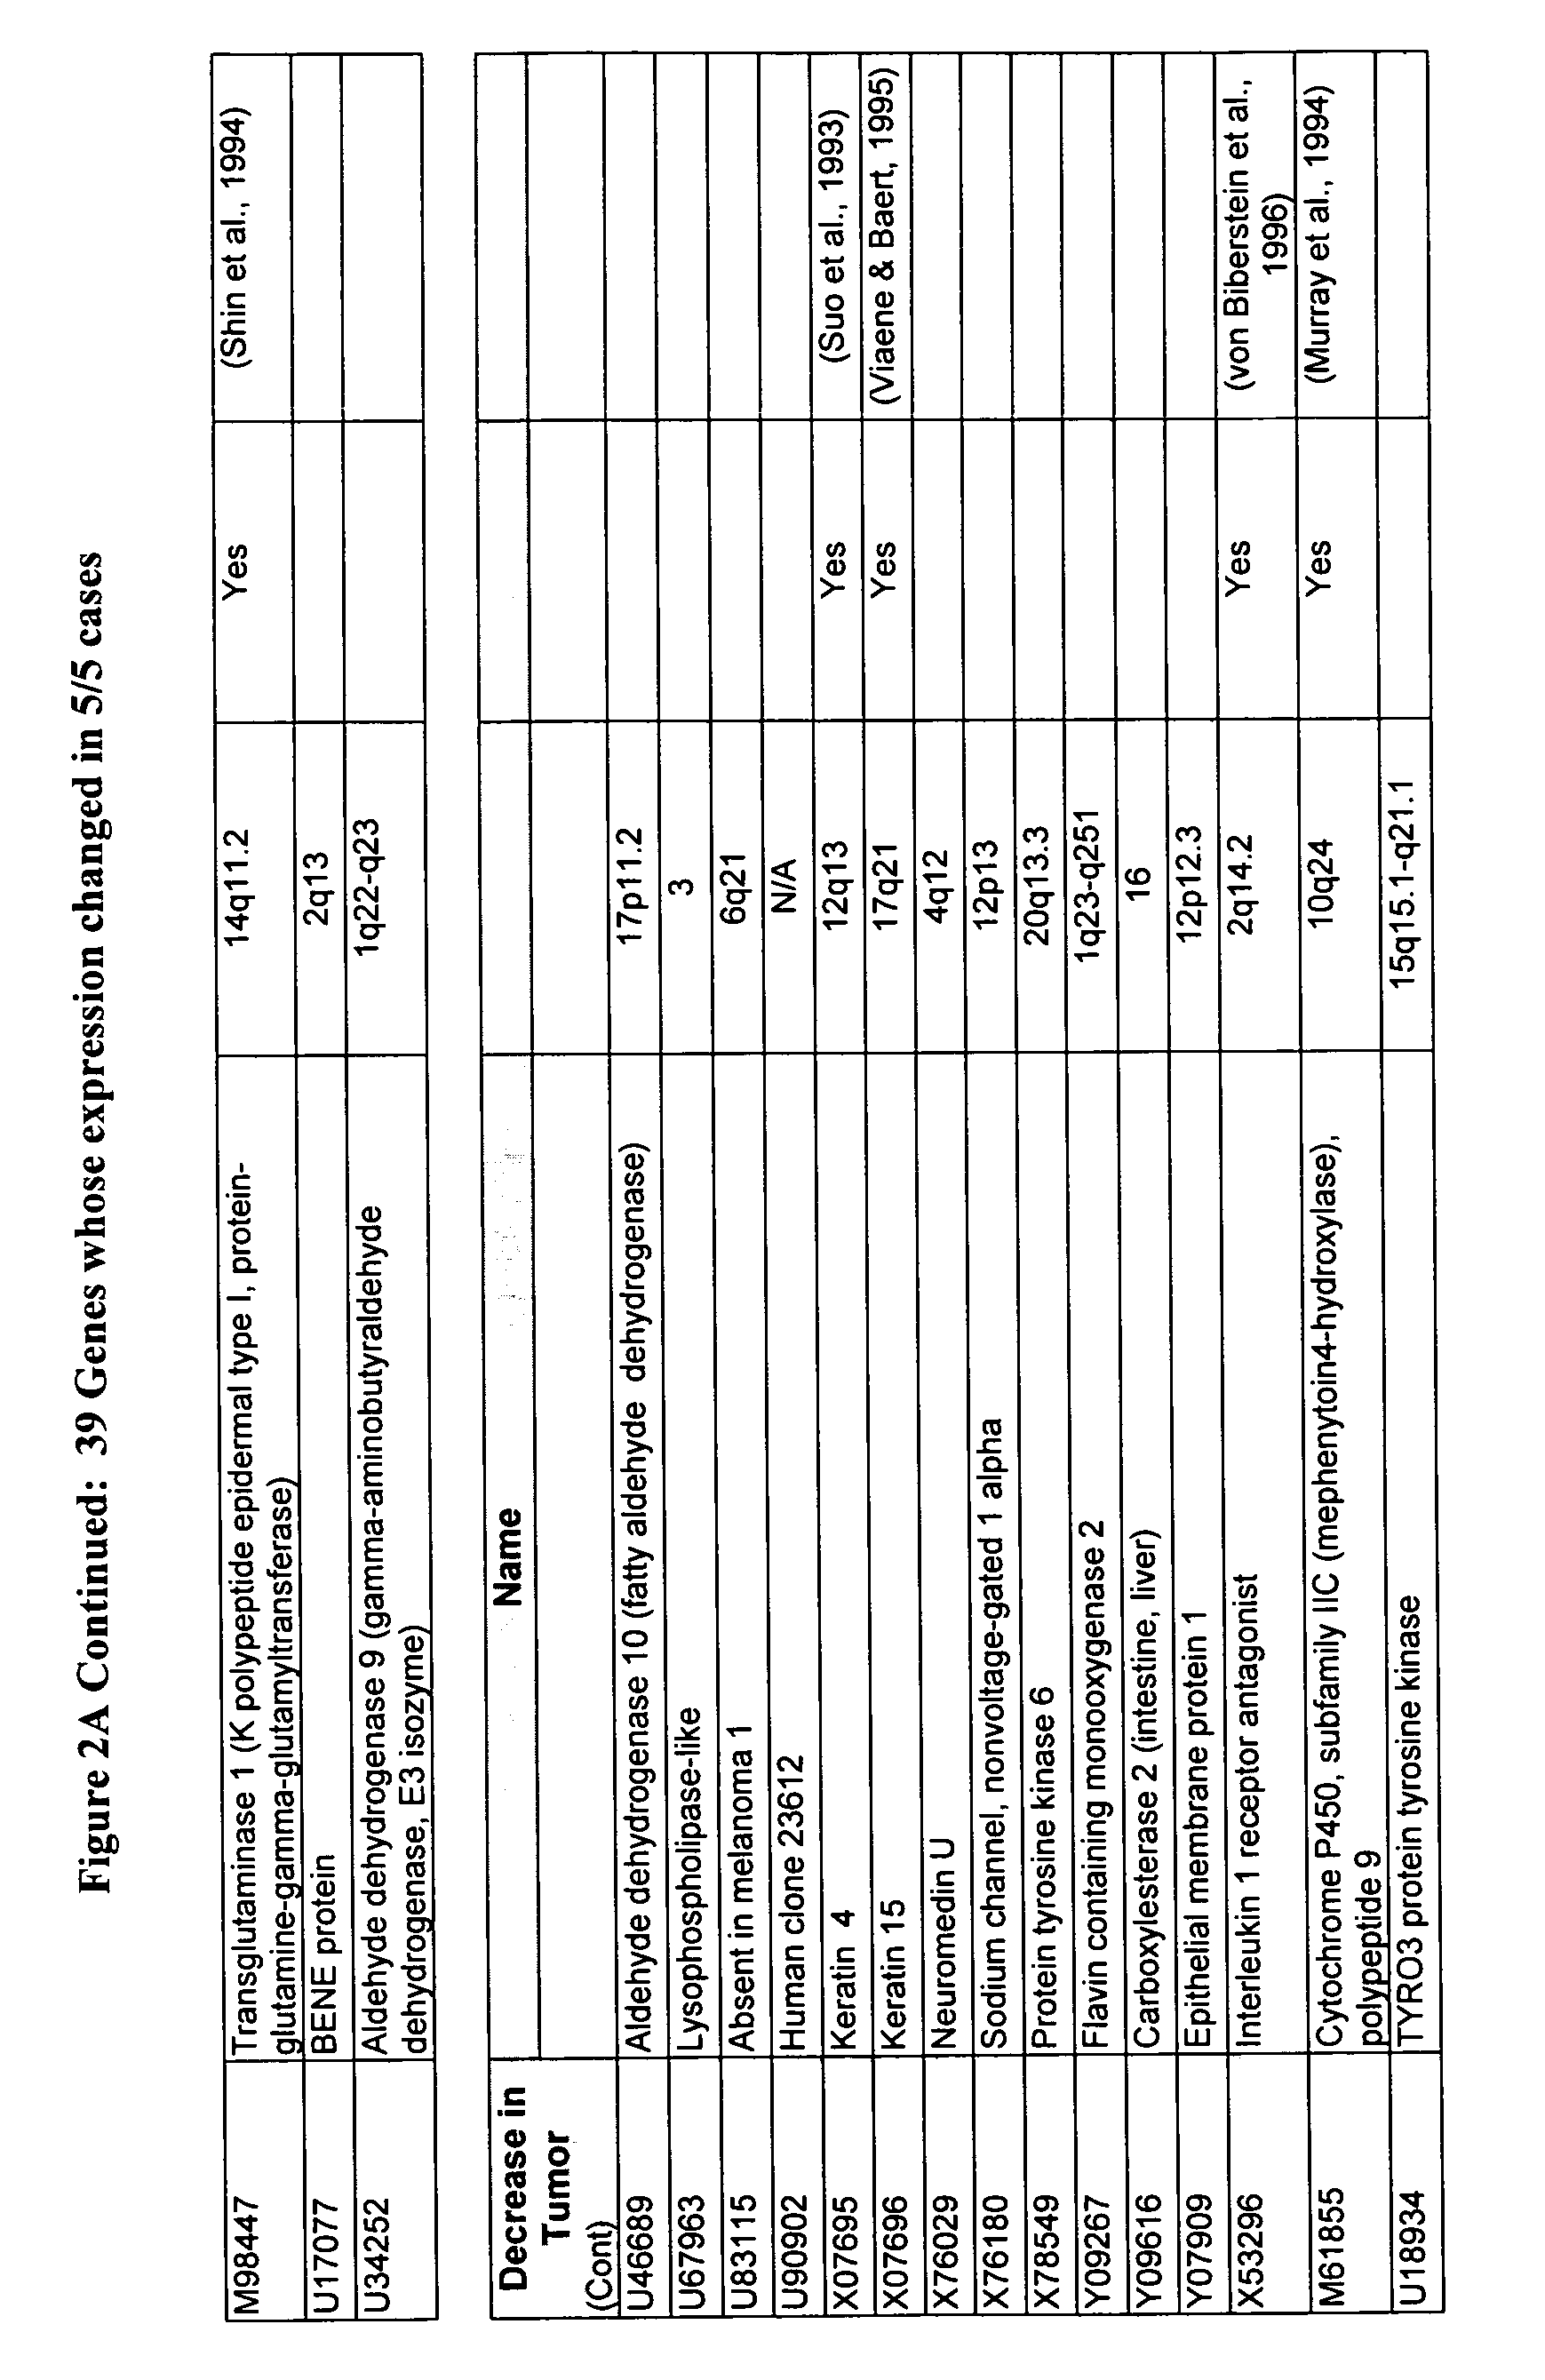 Methods for detecting and diagnosing oral cancer